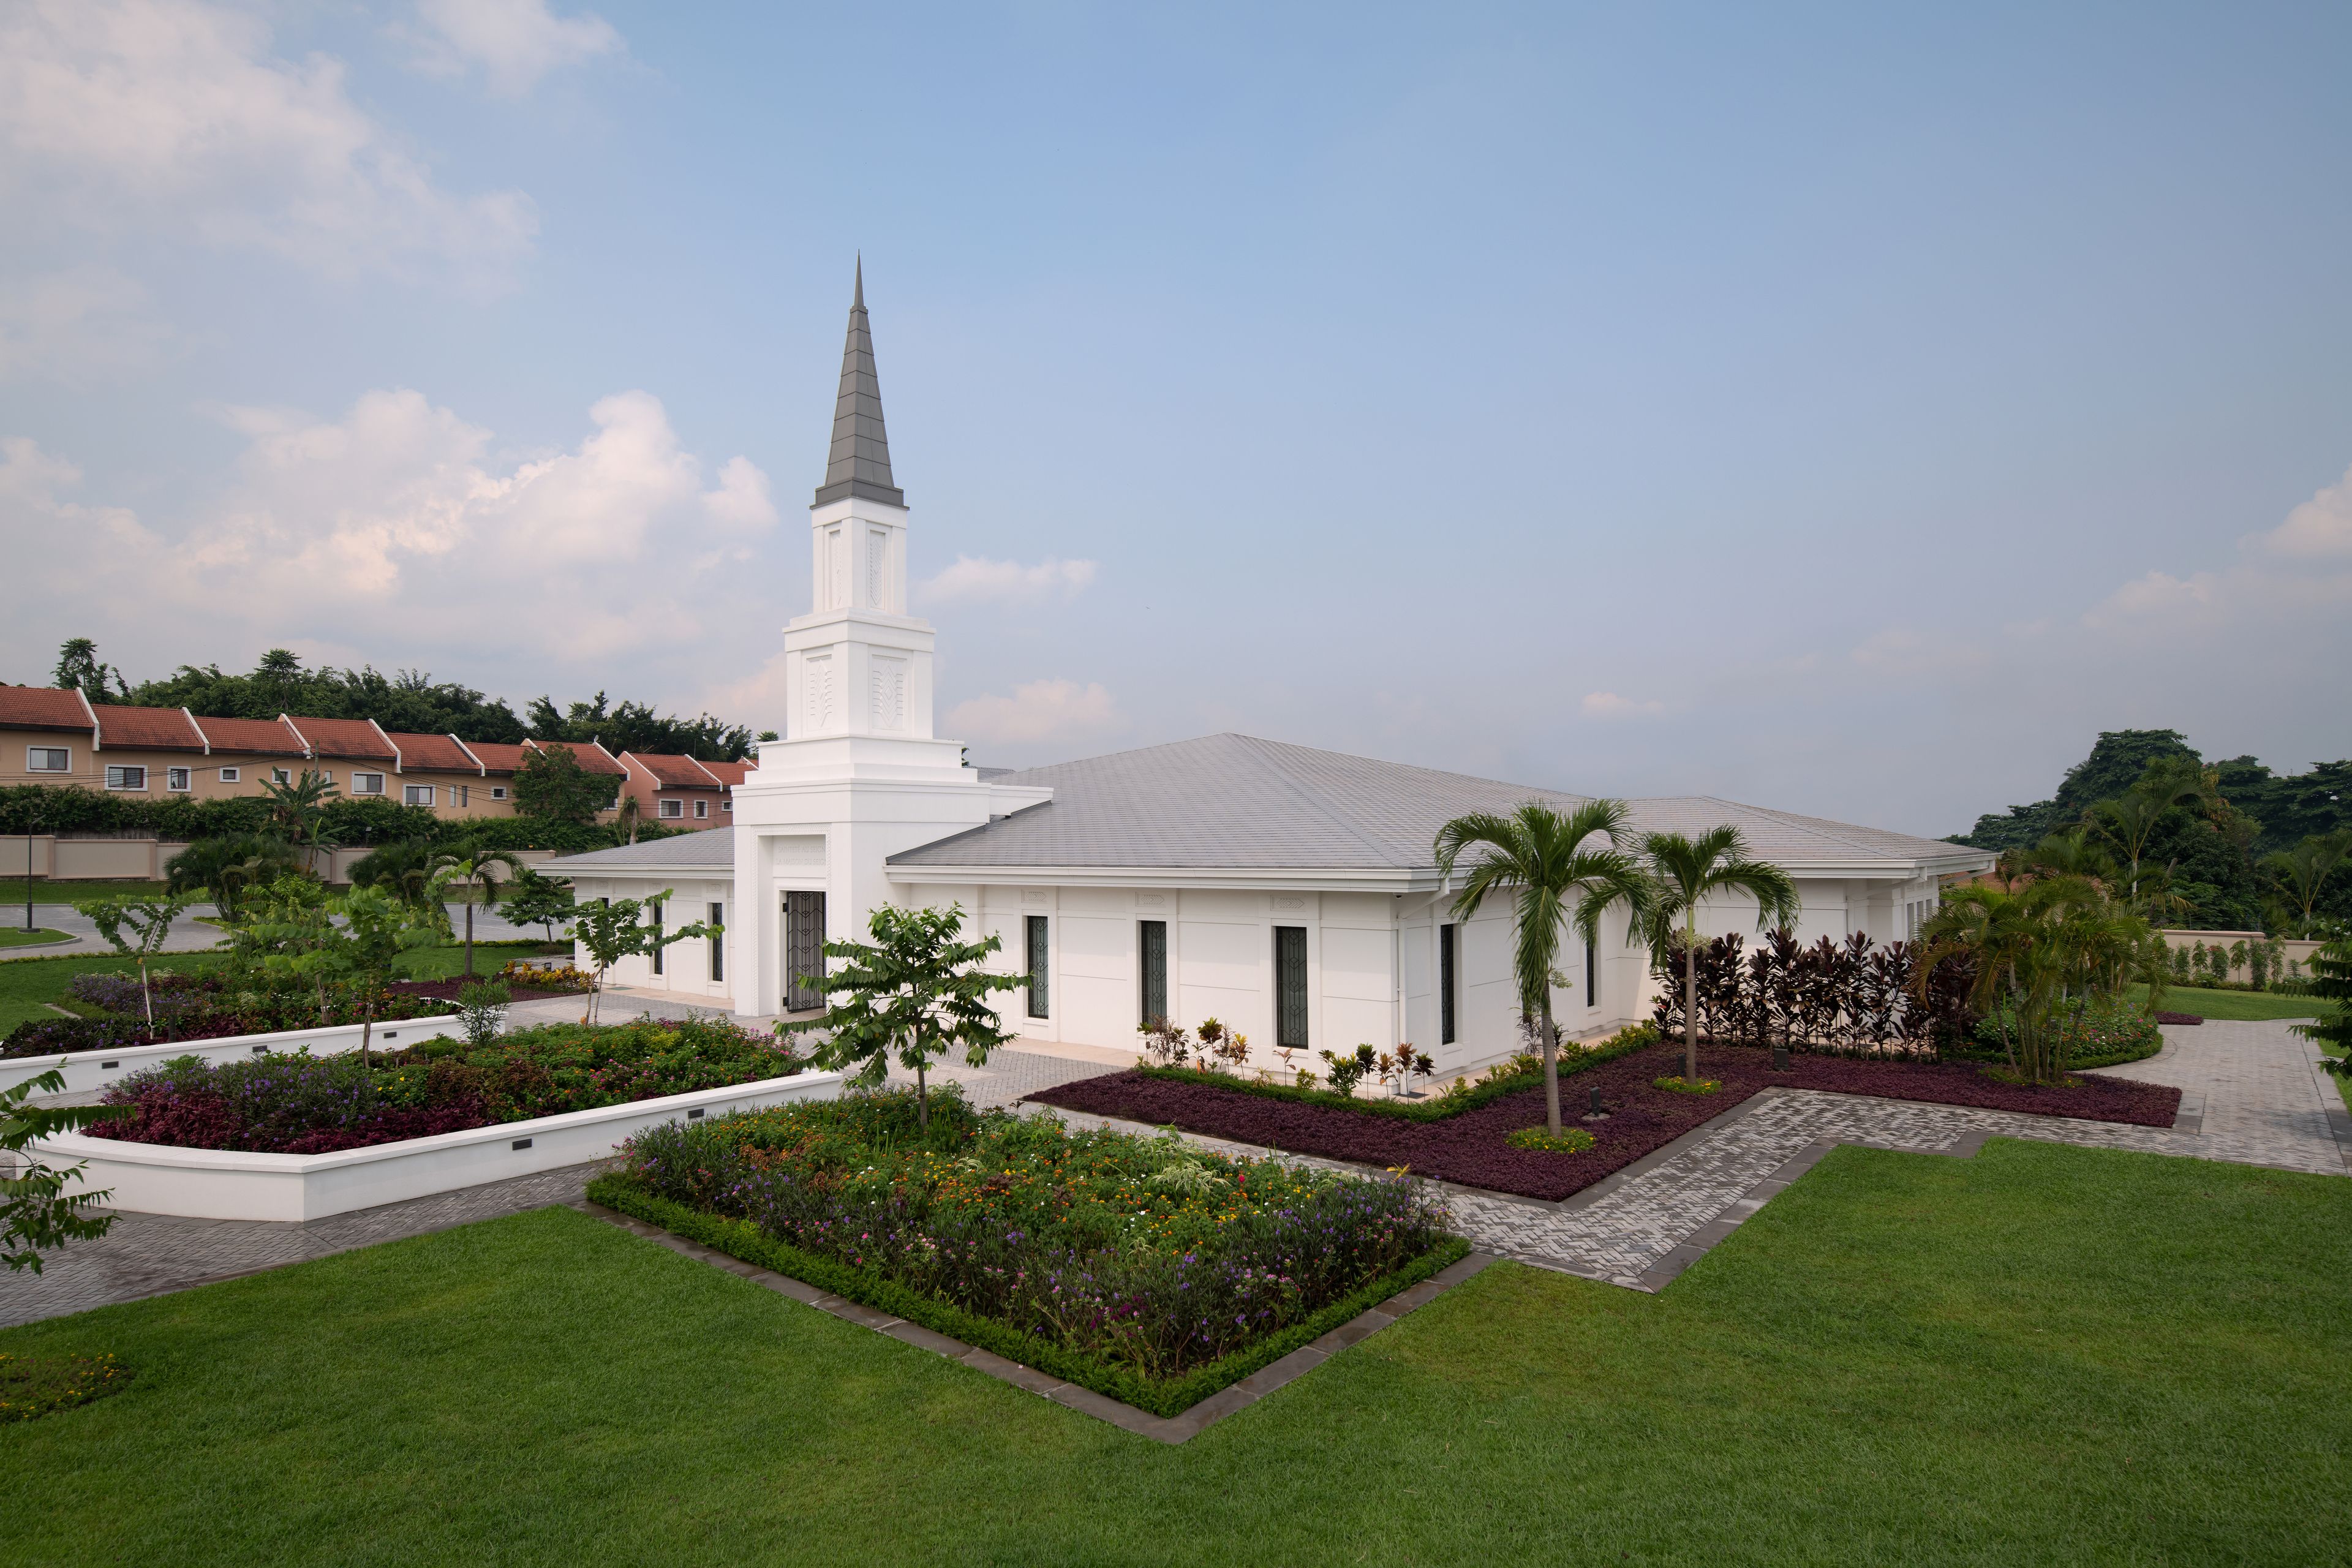 An exterior view of the Kinshasa Democratic Republic of the Congo Temple and grounds.